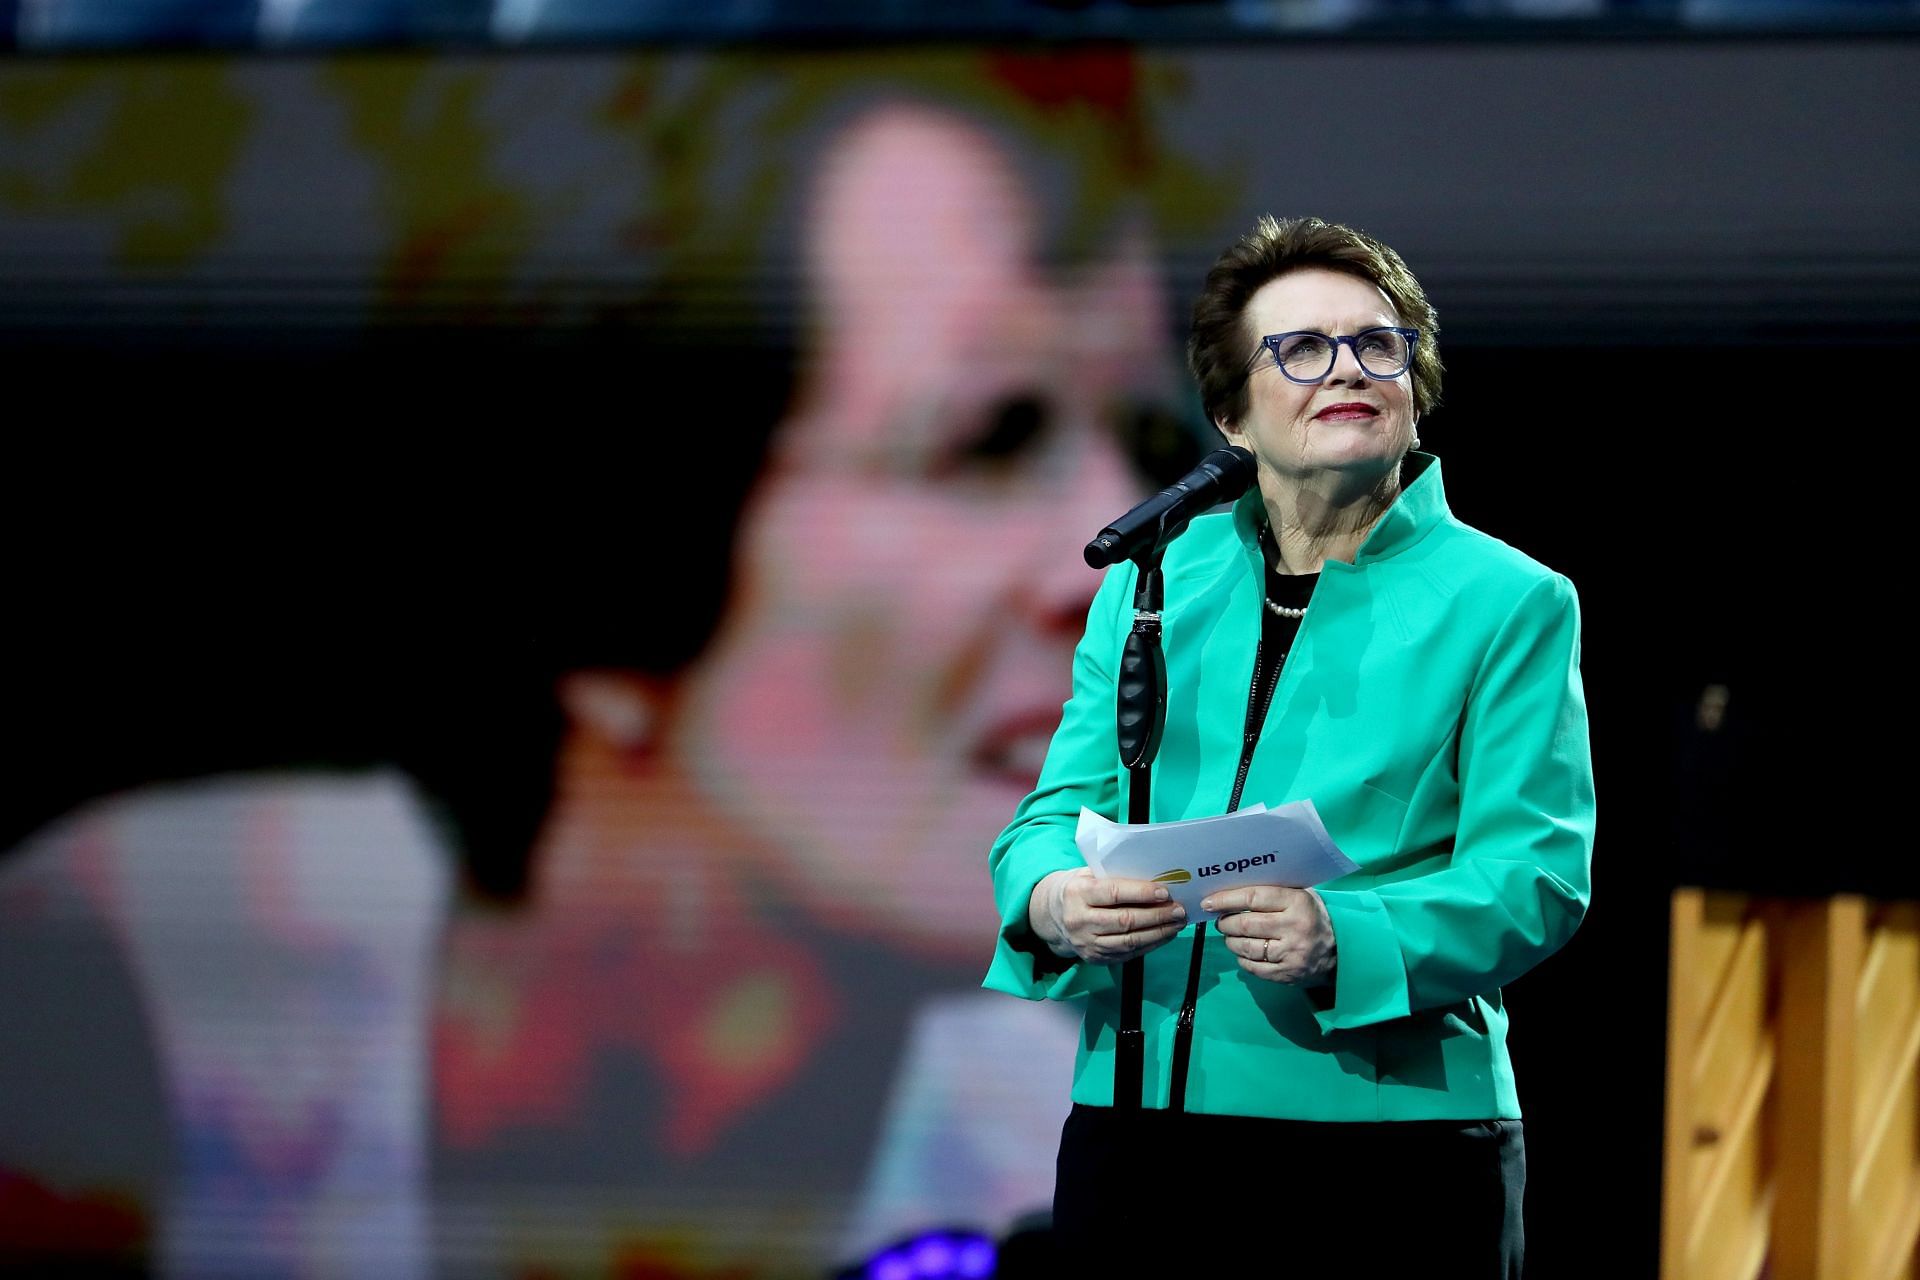 Billie Jean King at the 2019 US Open.